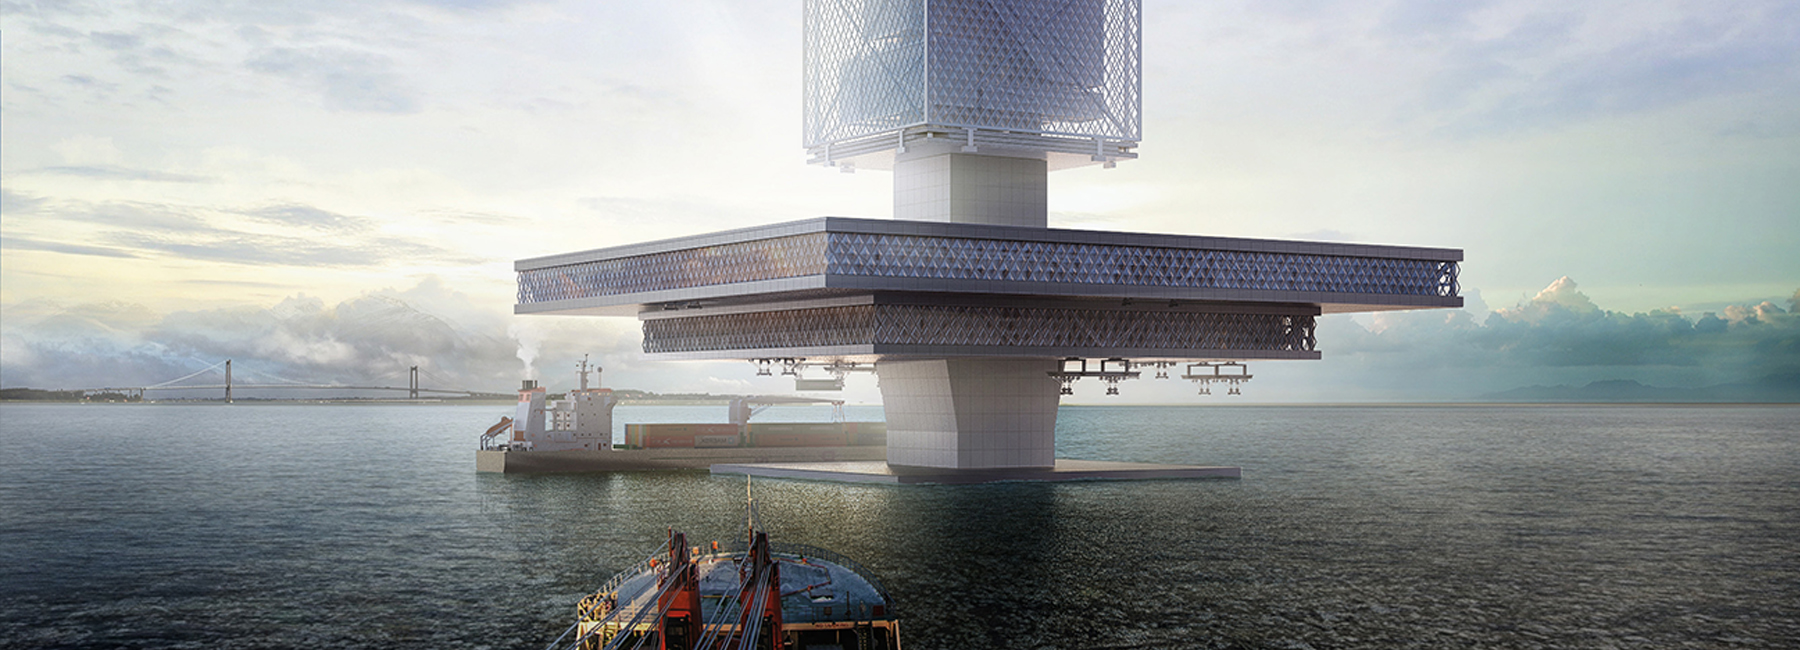 FILTRATION is a floating skyscraper envisioned to recycle ocean garbage